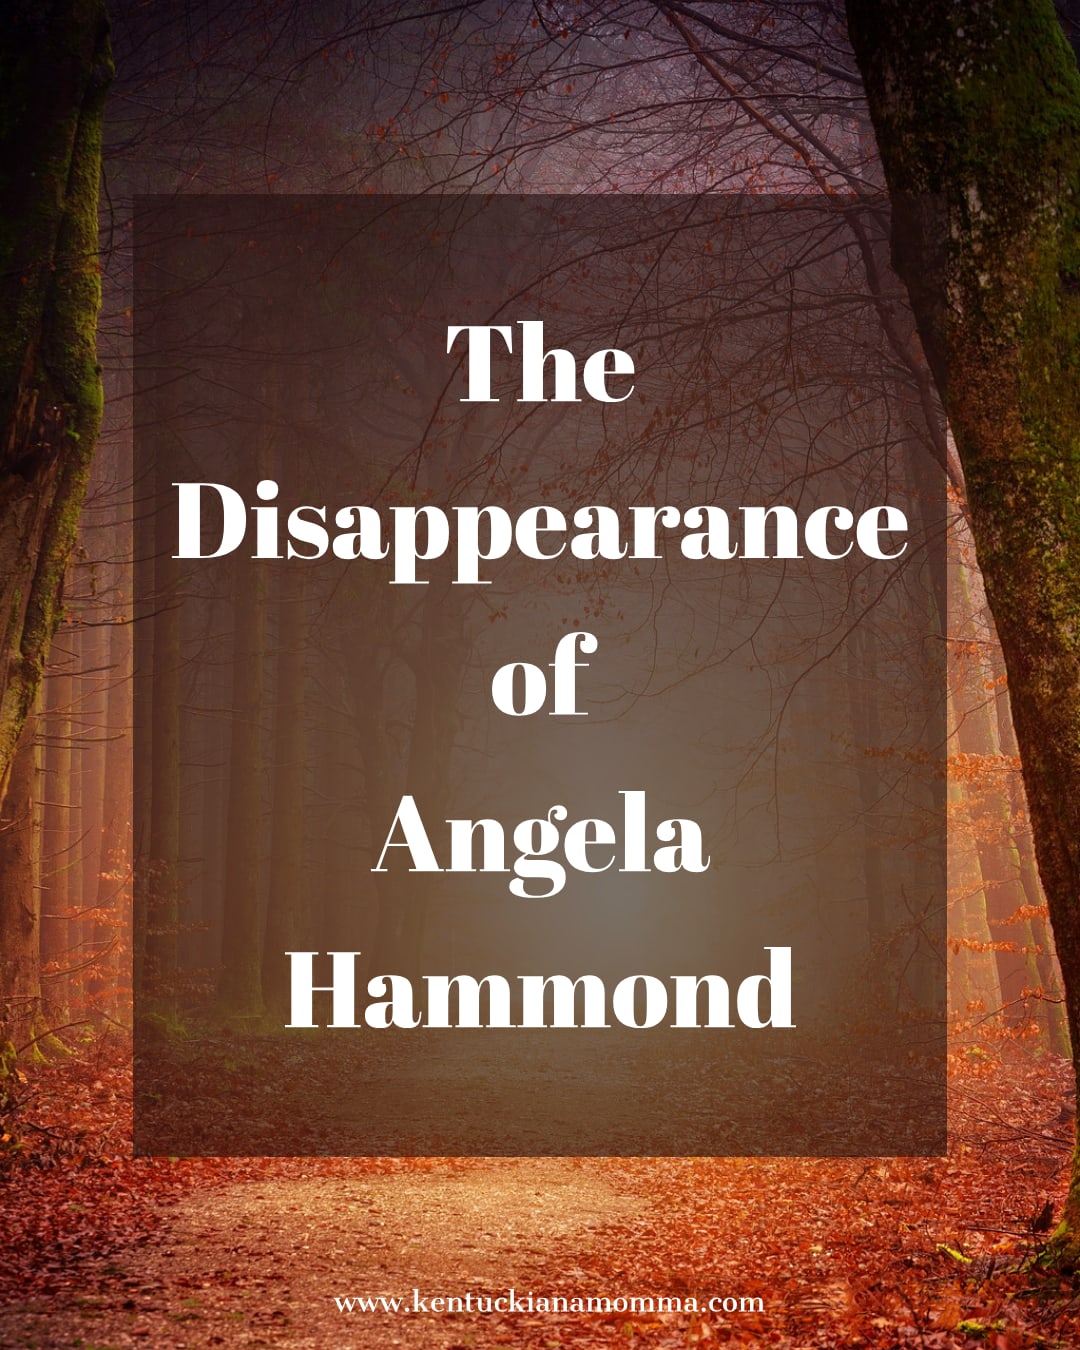 The Disappearance of Angela Hammond